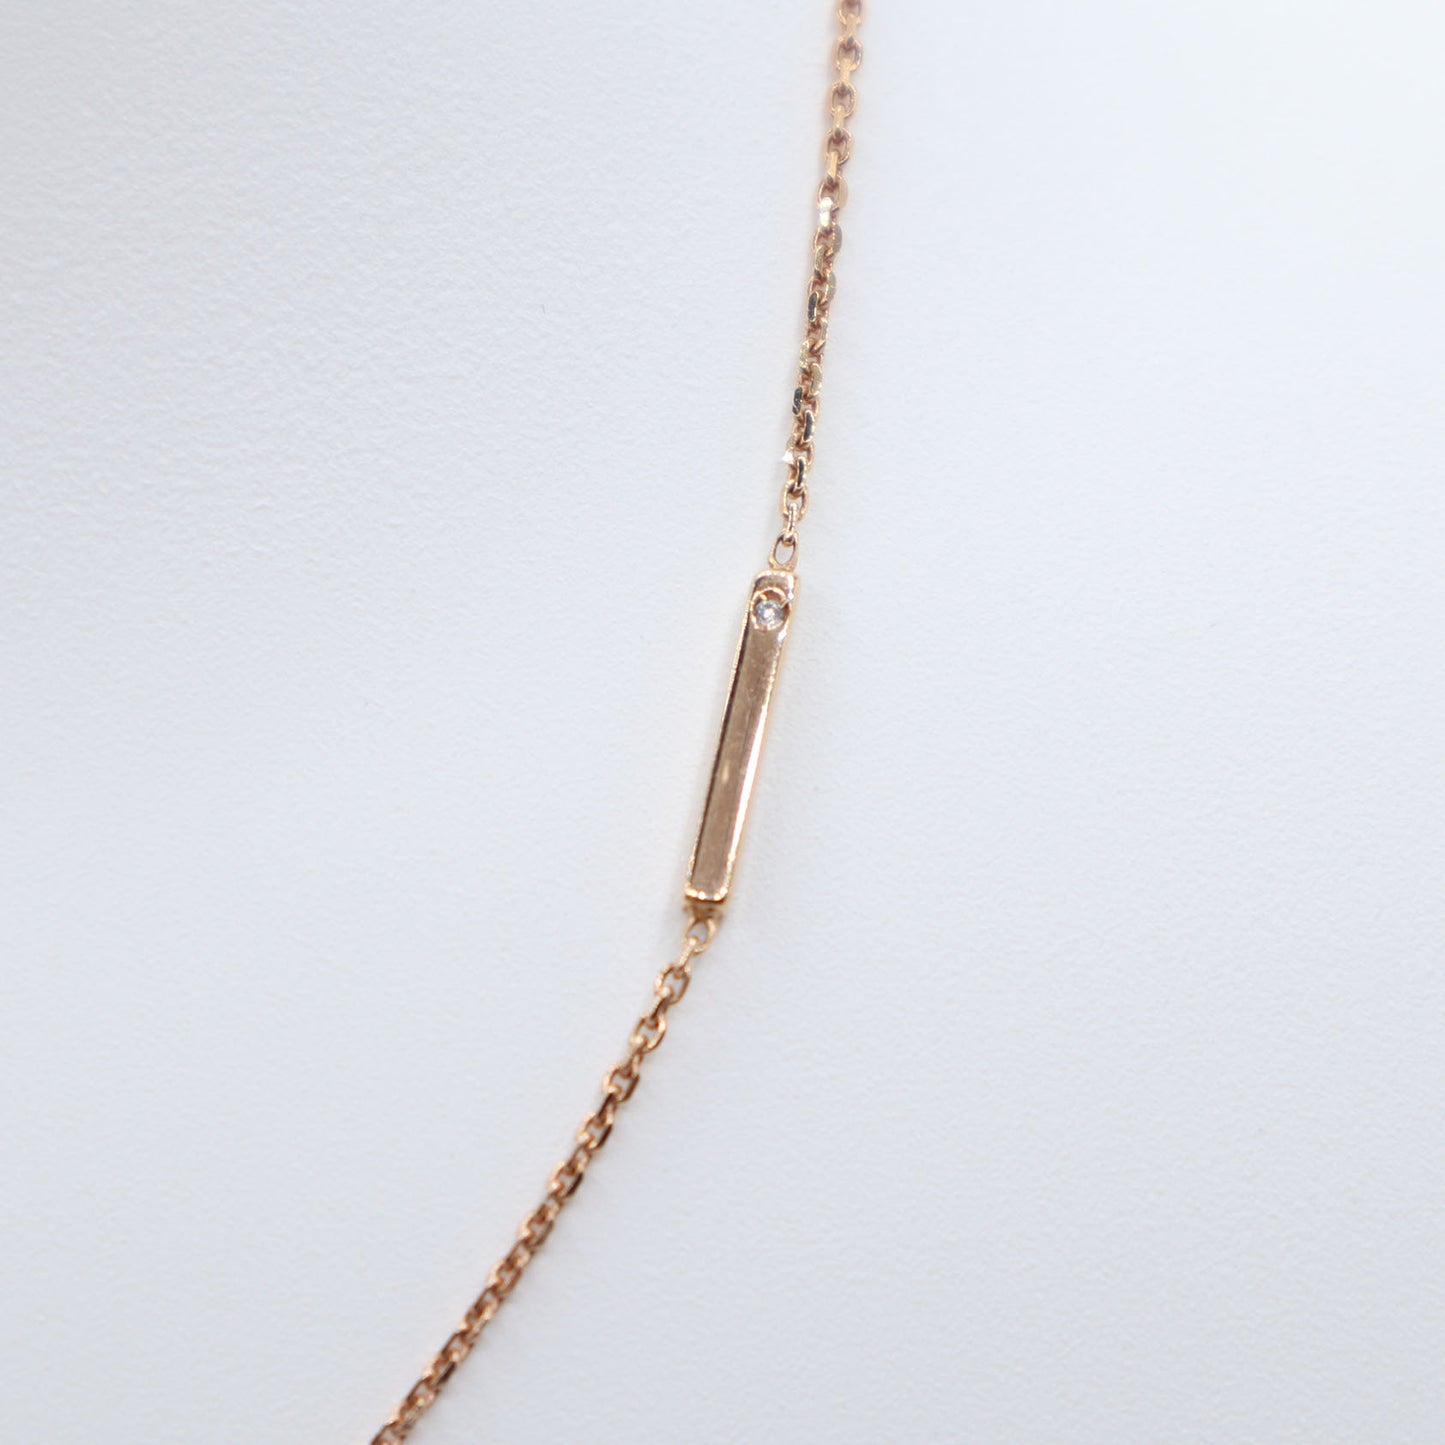 SALE 35% OFF - Rose Gold Asymetrical Bar Necklace